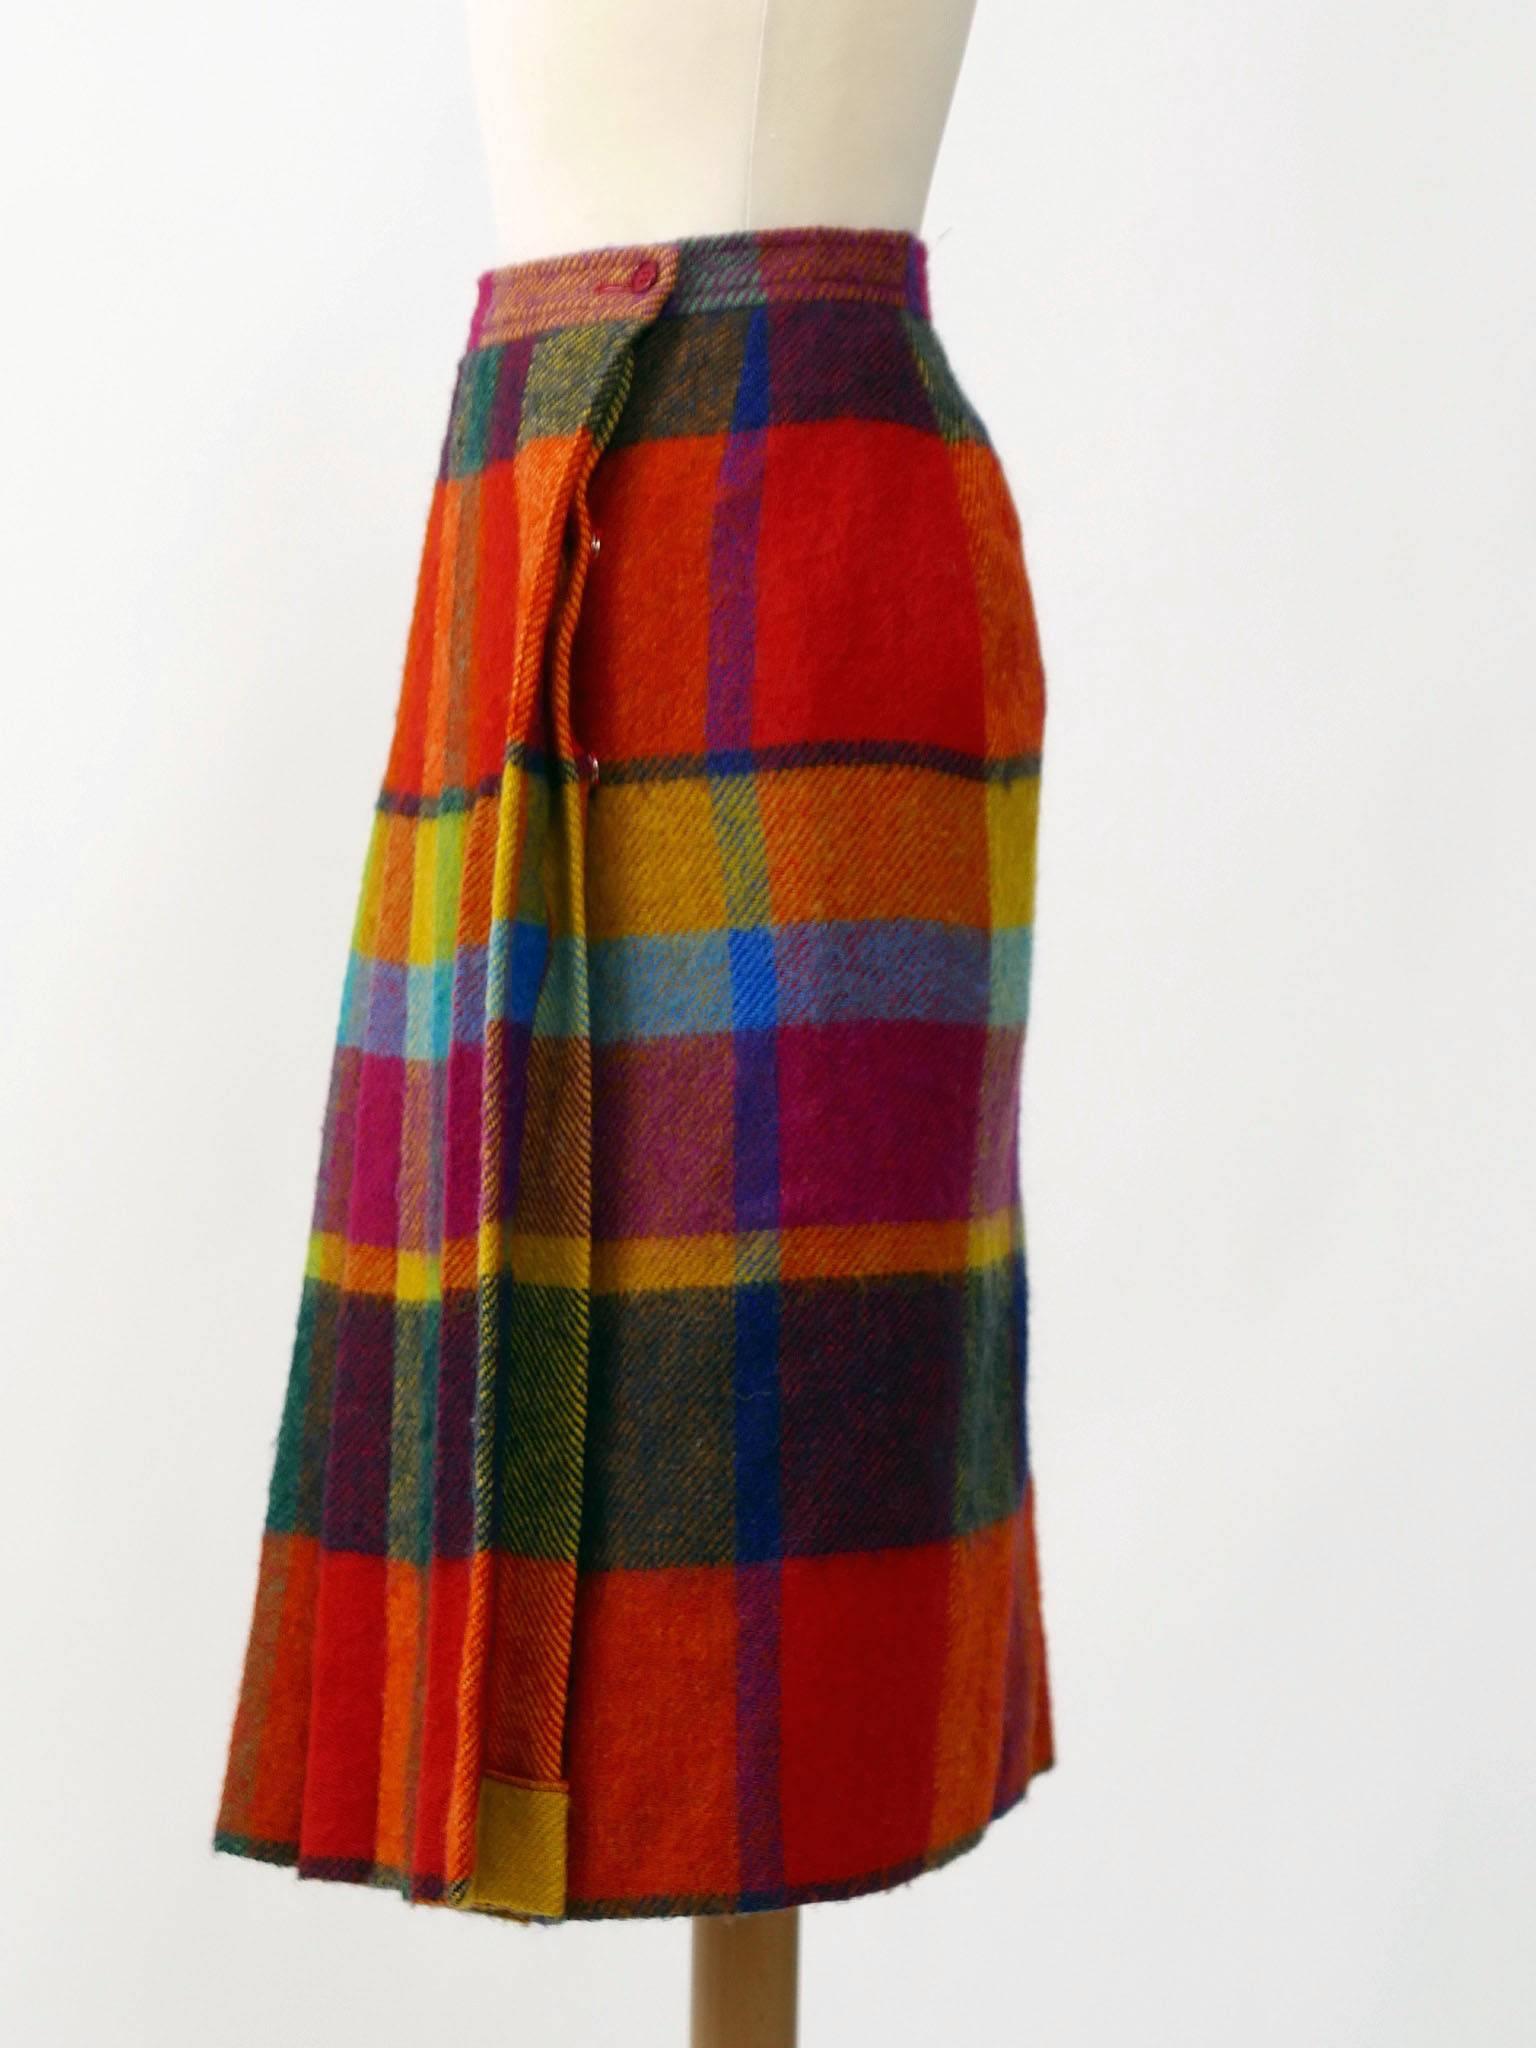 This lovely Yves Saint Laurent 1980s pleateds skirt is in a red and yellow plaid tartan wool fabric. It has wrap closure with snaps and buttons and is fully lined. 

Very good vintage condition

Label: Yves Saint Laurent Rive Gauche - Made in